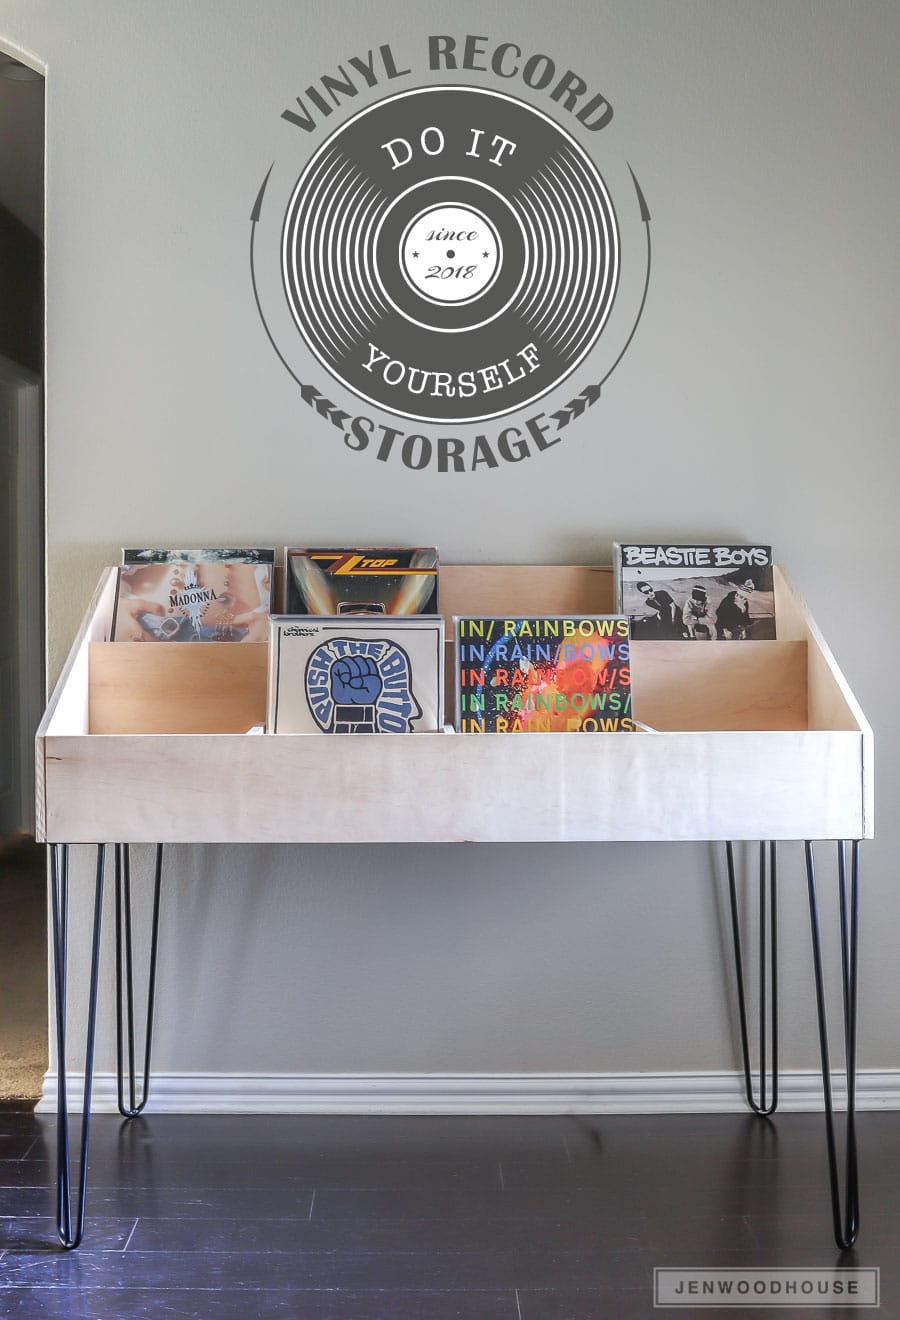 How to build a DIY vinyl record storage cabinet display